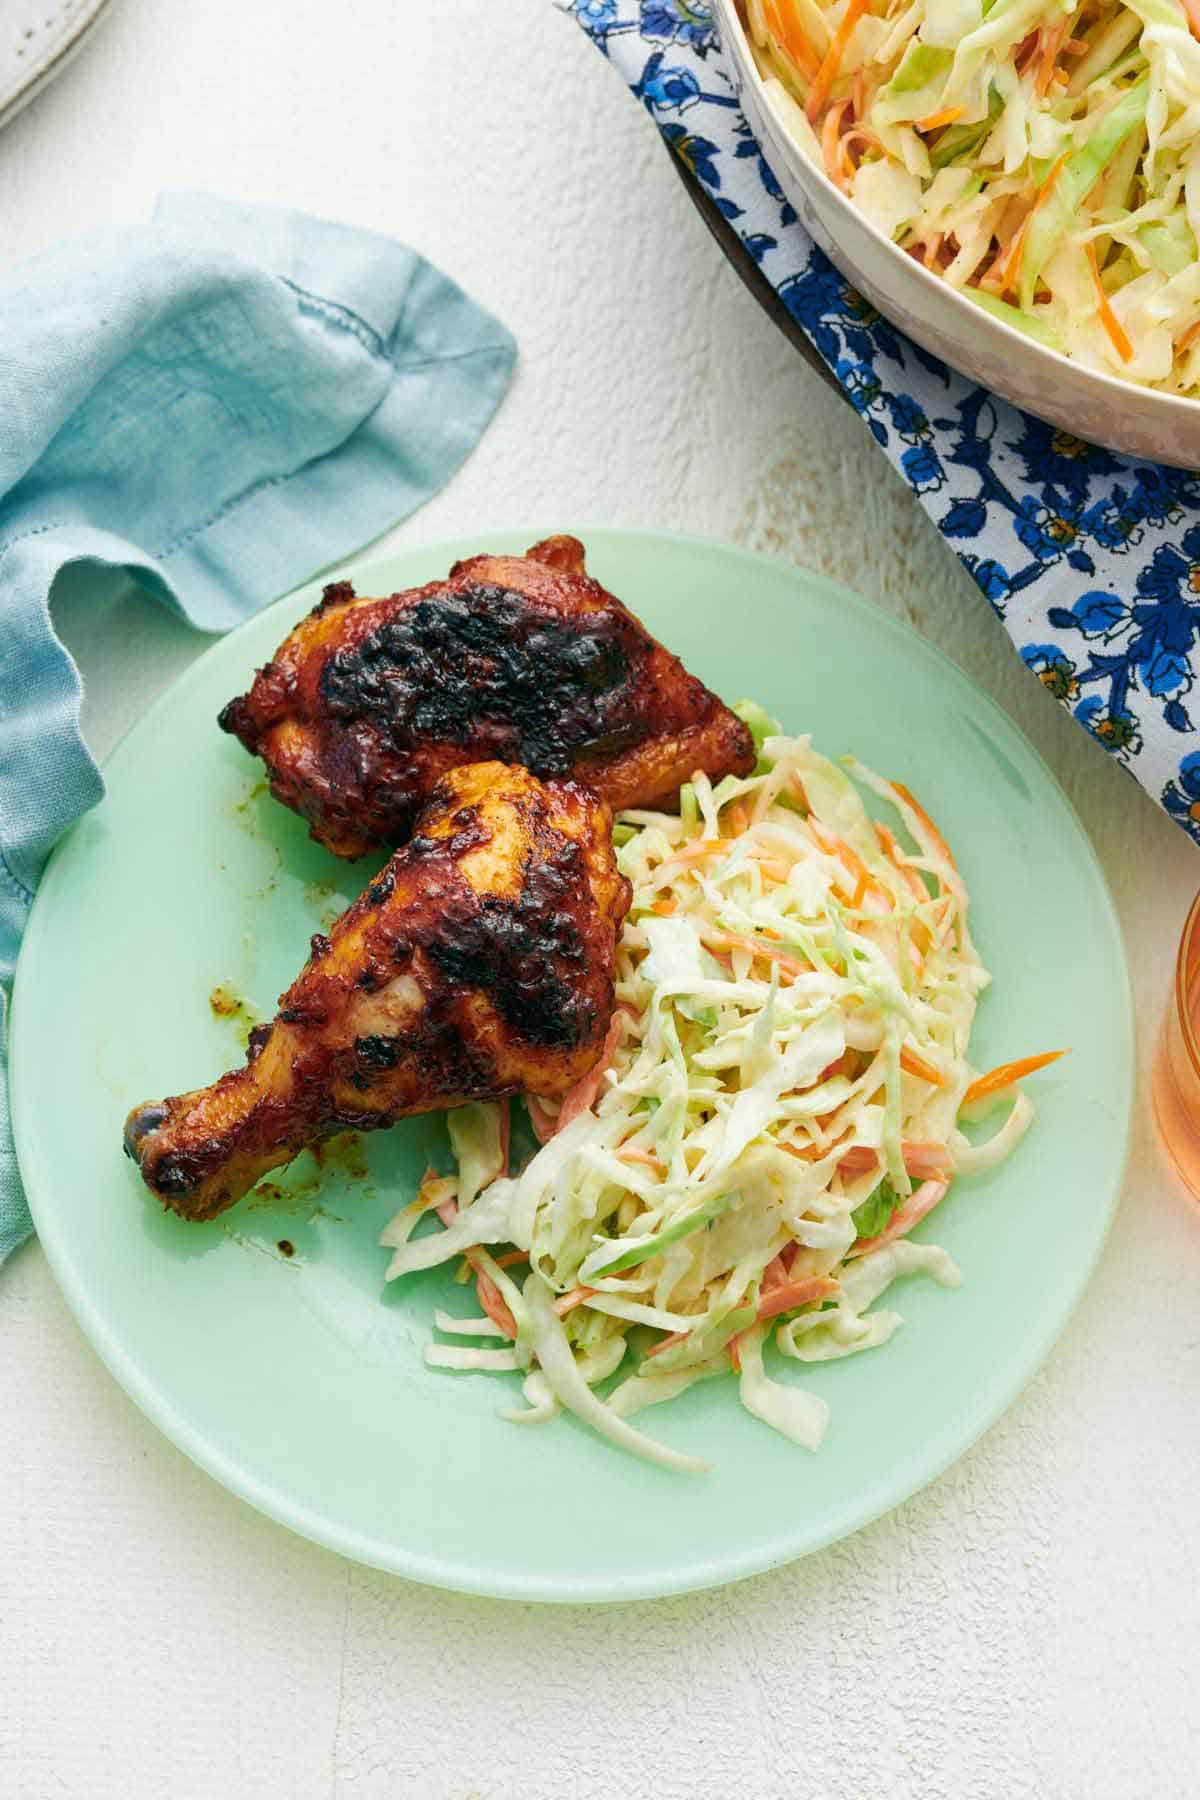 Overhead view of a plate of grilled chicken and coleslaw.